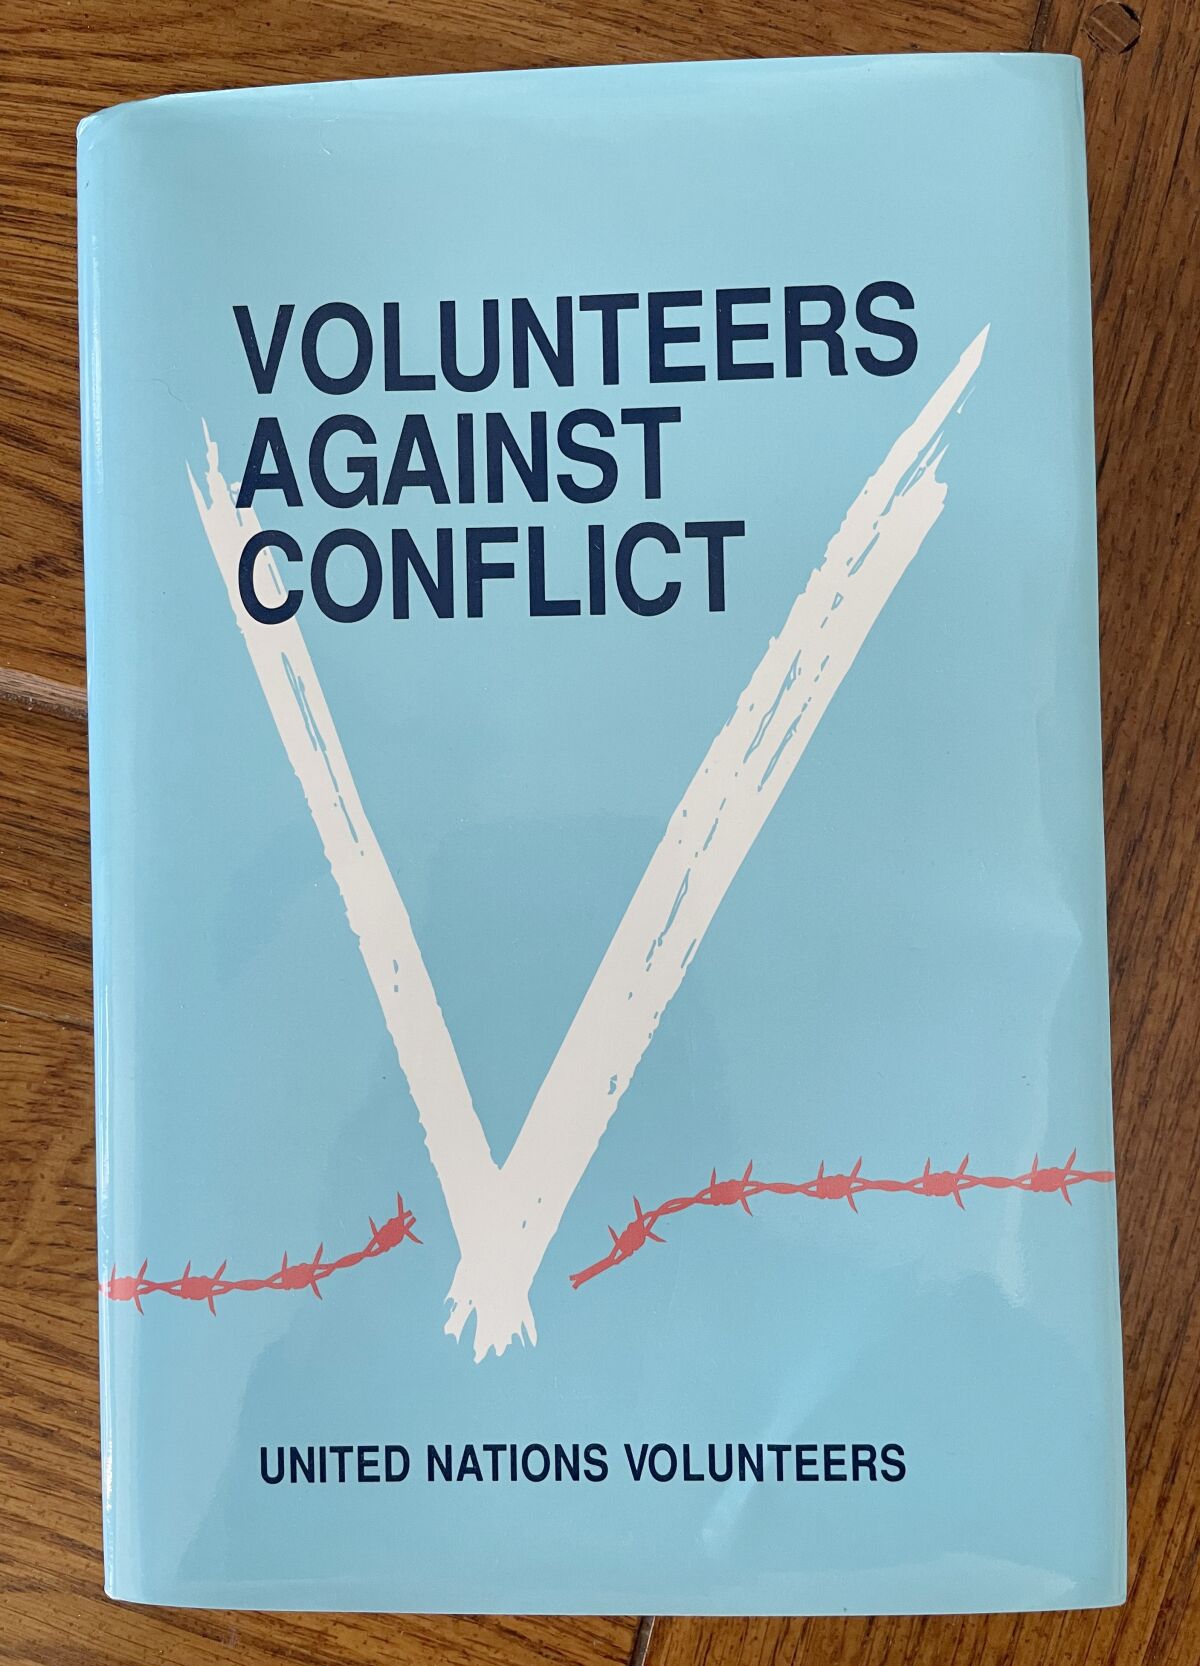 Diane Conklin compiled stories of United Nations Volunteers participants in the book “Volunteers Against Conflict.”